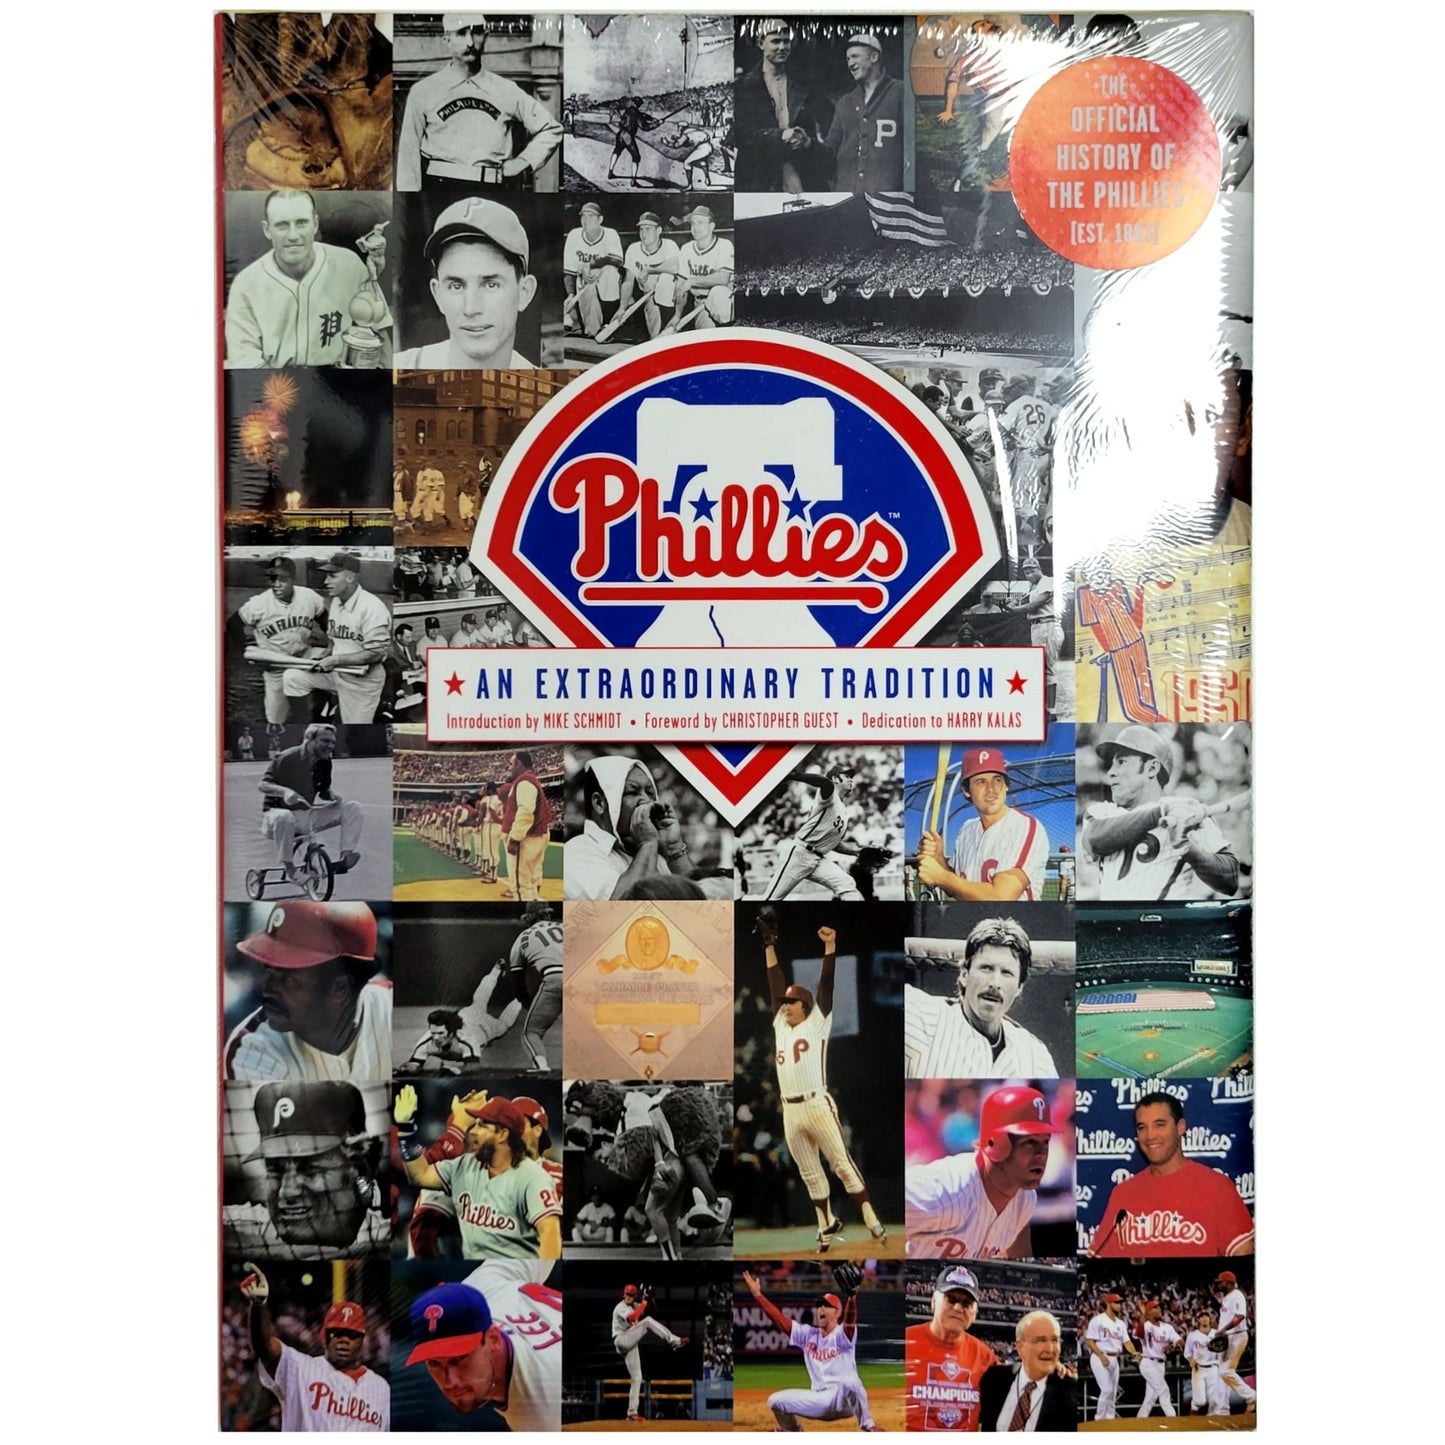 Phillies - An Extraordinary Tradition Hardcover Collectible Book